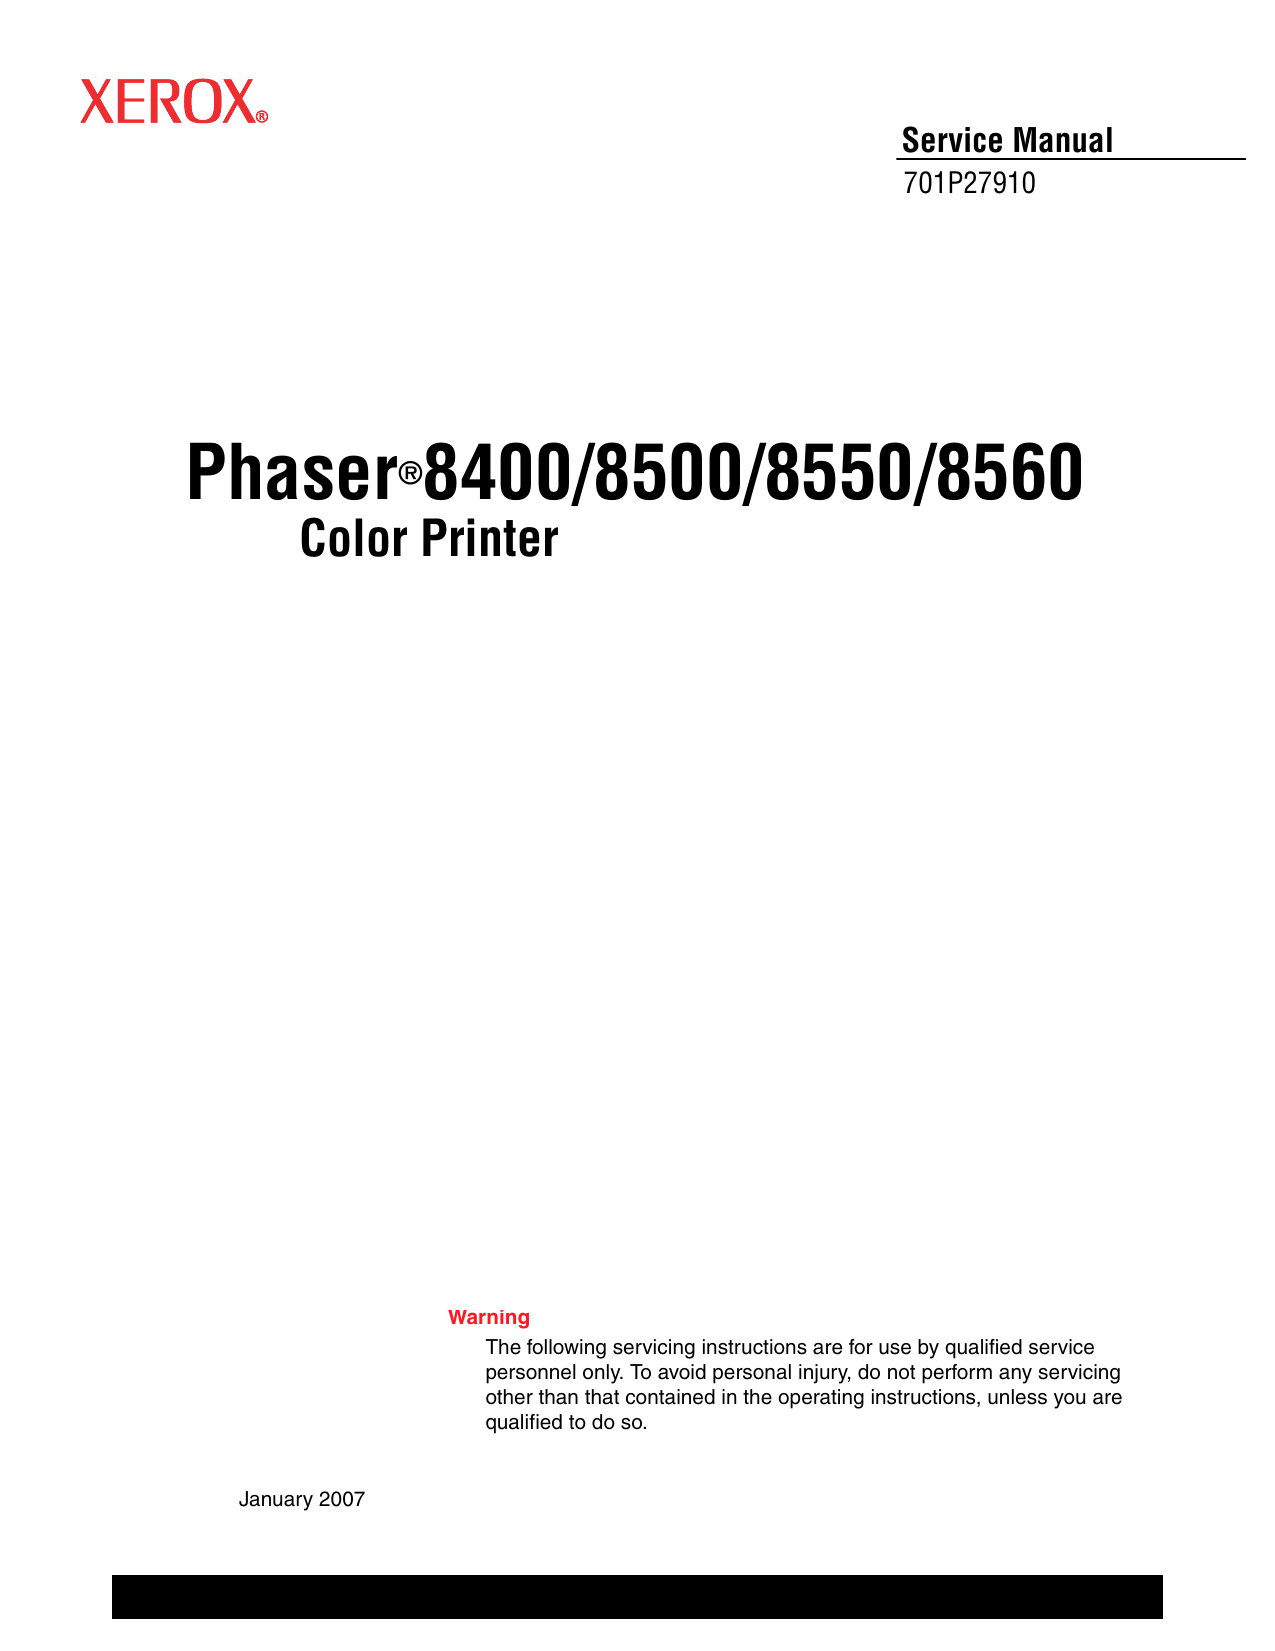 Xerox Phaser 8400, 8500, 8550, 8560 color printer service manual Preview image 3